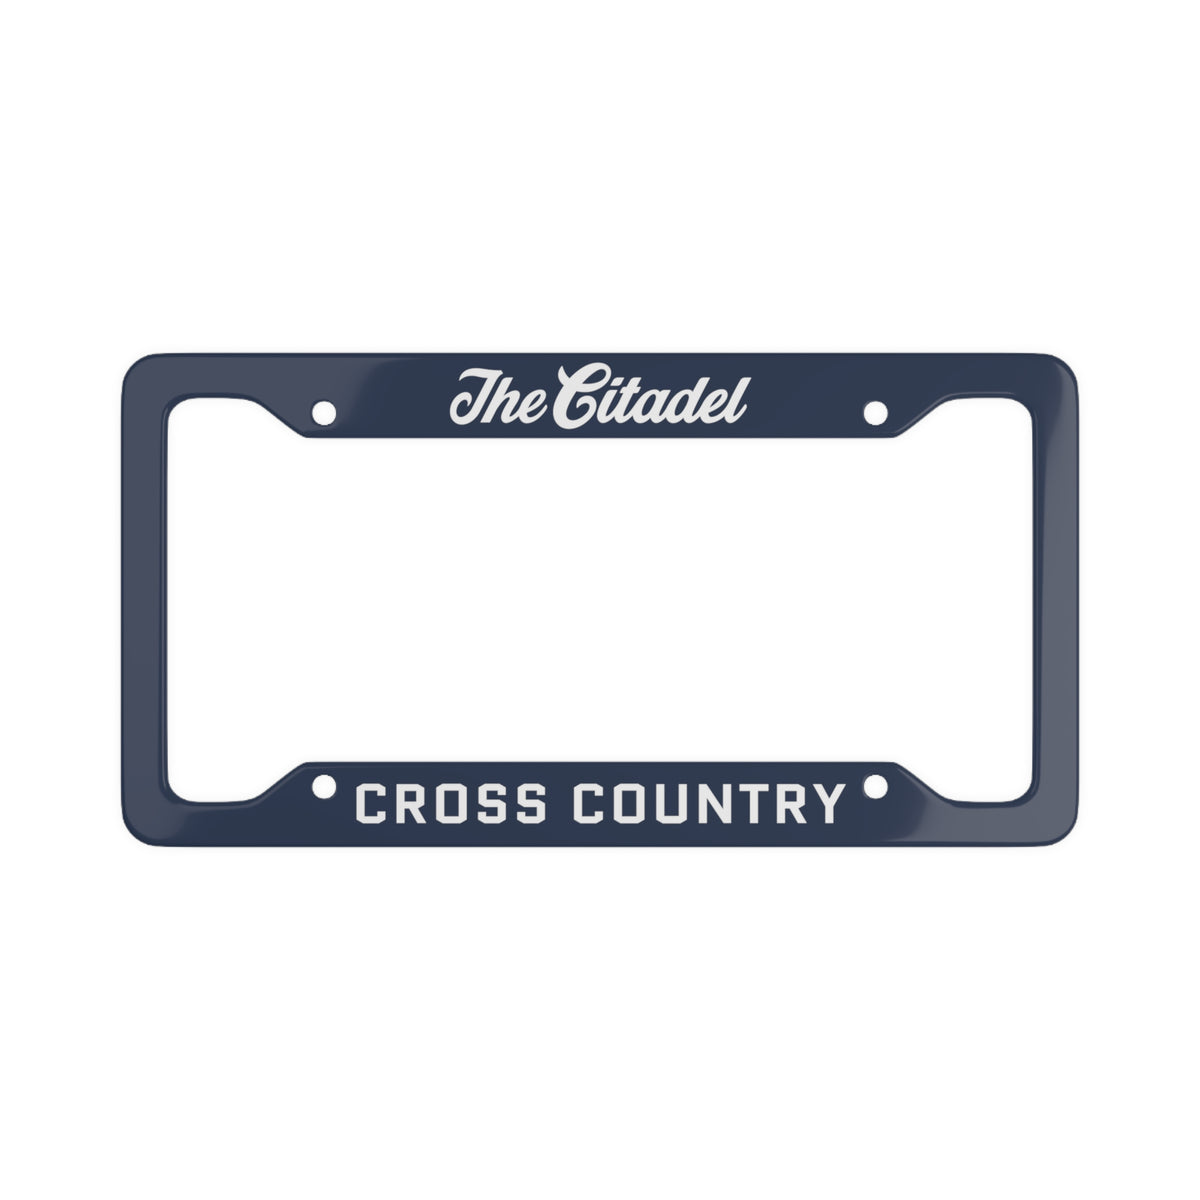 The Citadel, Cross Country License Plate Frame